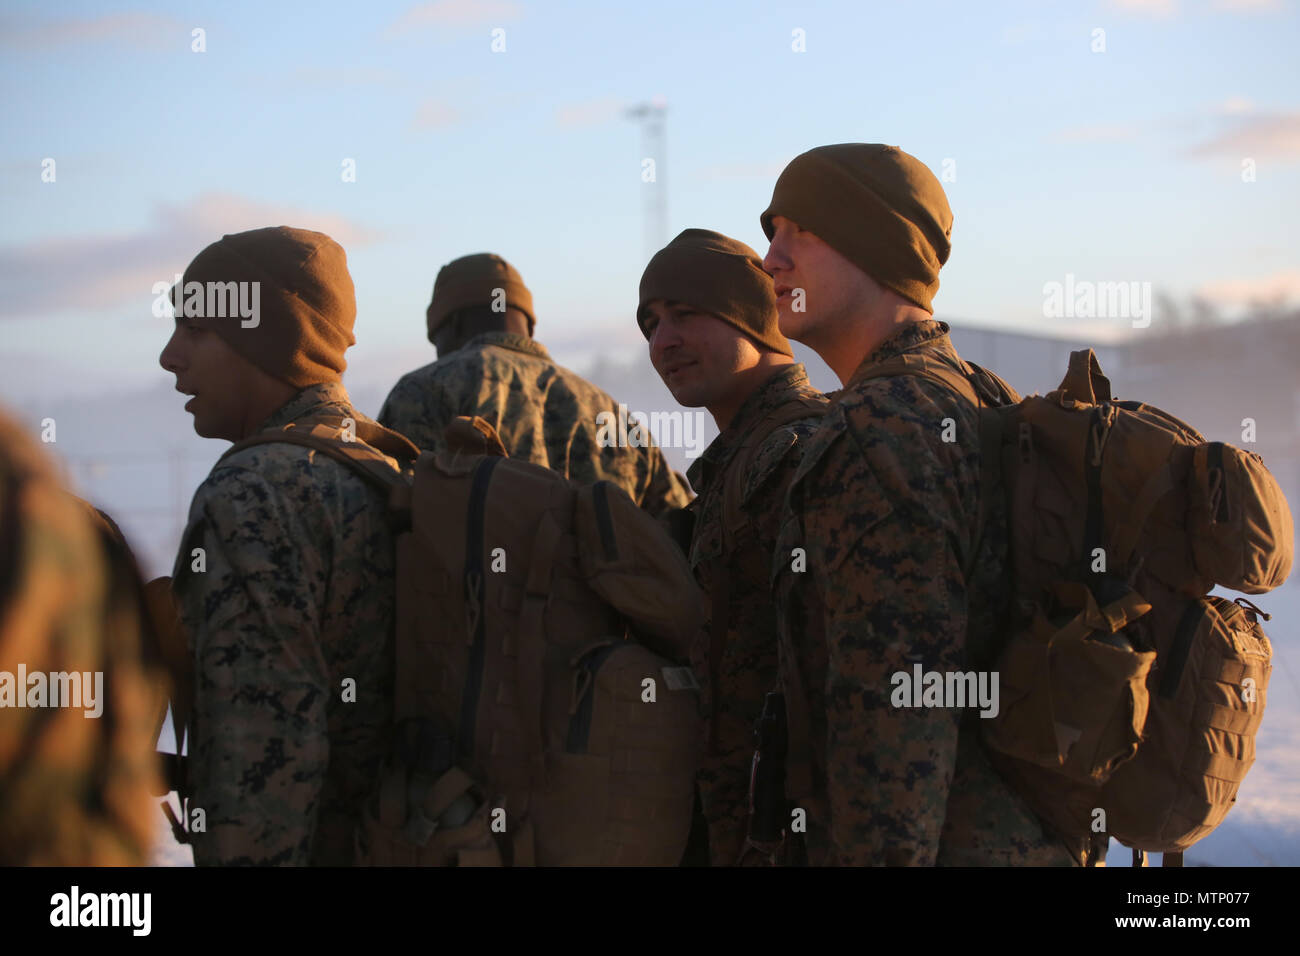 U.S. Marines make a formation shortly after disembarking the plane at Vaernes Garnison, Norway, Jan. 16, 2017. The Marines with Black Sea Rotational Force 17.1 arrived at Vaernes Garnison early in the morning as part of Marine Rotational Force Europe 17.1. (U.S. Marine Corps photo by Lance Cpl. Victoria Ross) Stock Photo